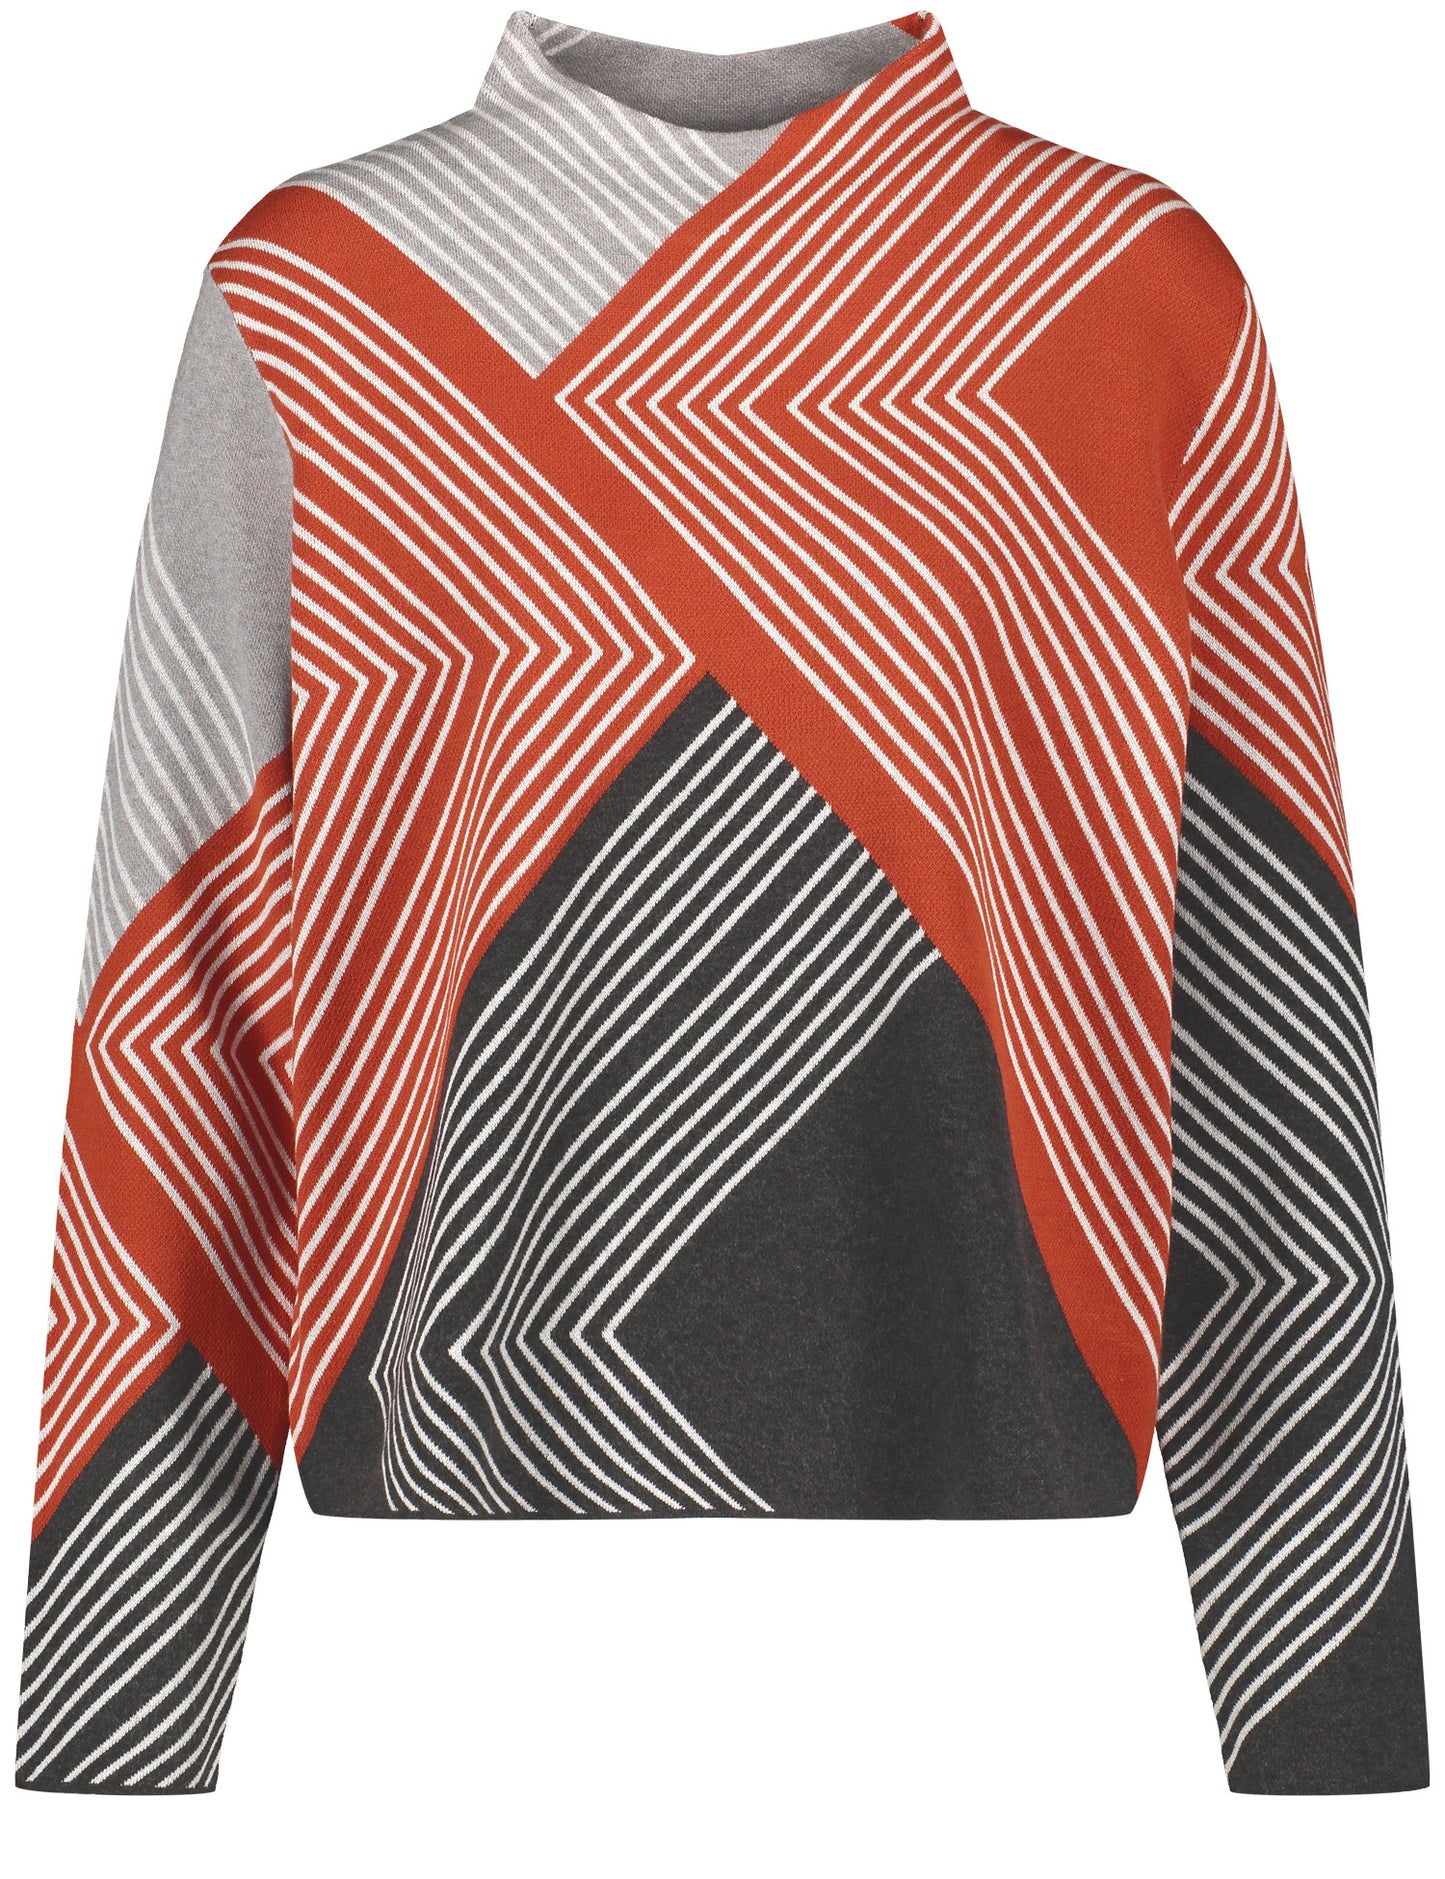 Jacquard-look sweater with a graphic pattern